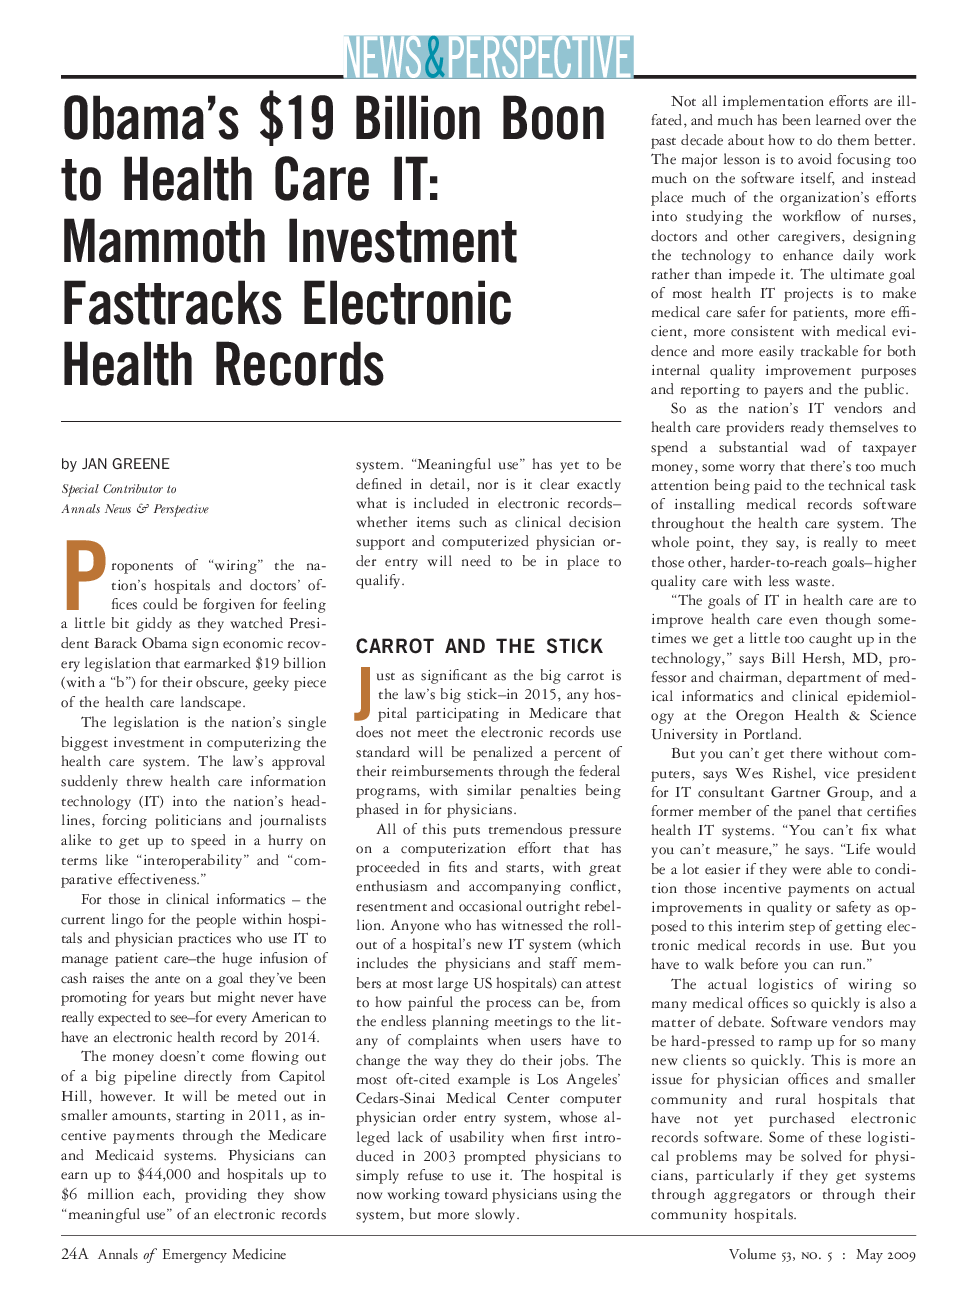 Obama's $19 Billion Boon to Health Care IT: Mammoth Investment Fasttracks Electronic Health Records